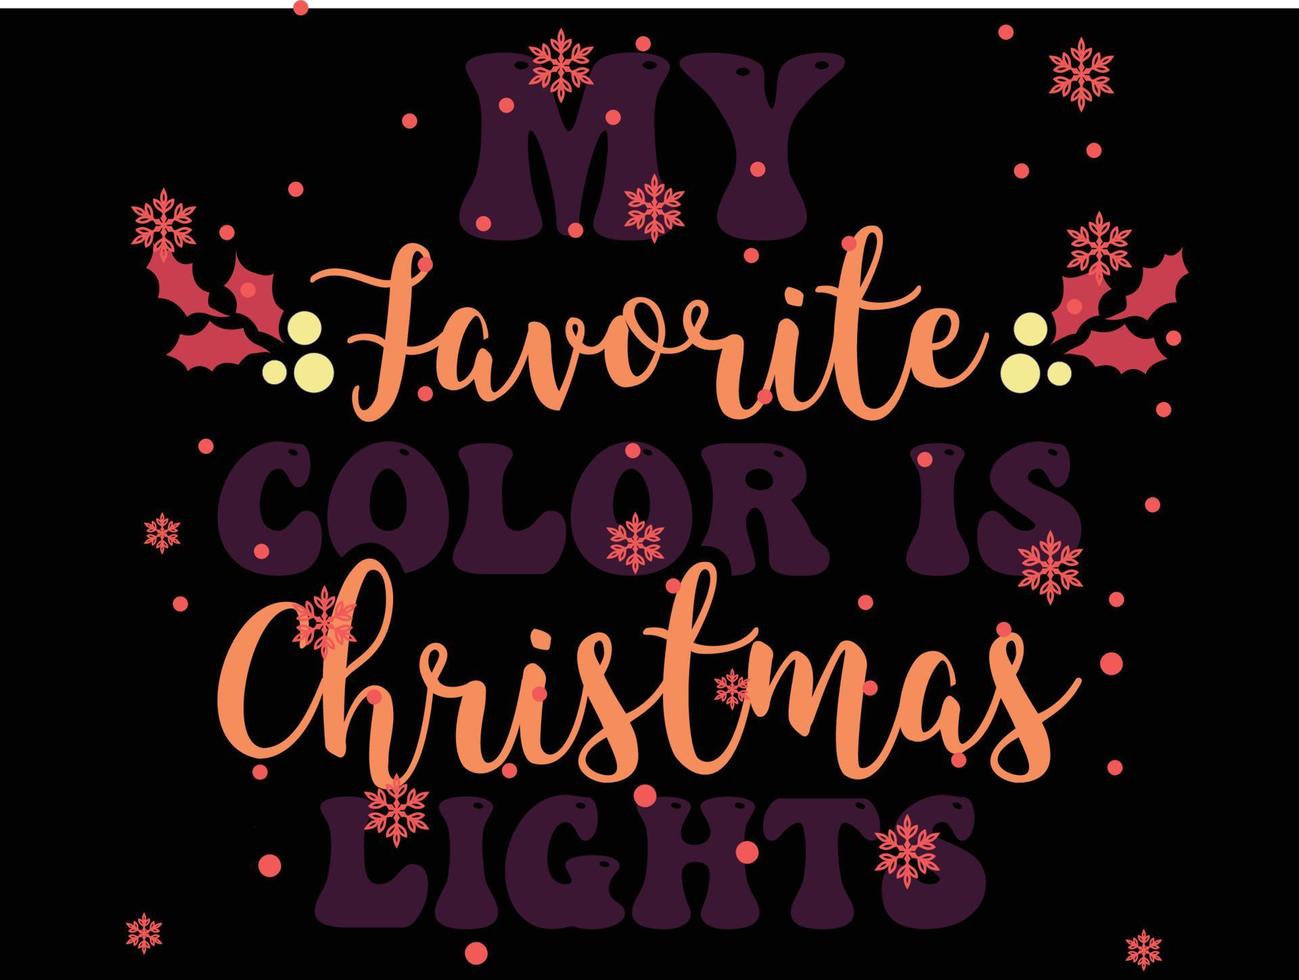 My Favorite Color is Christmas Light 03 Merry Christmas and Happy Holidays Typography set vector